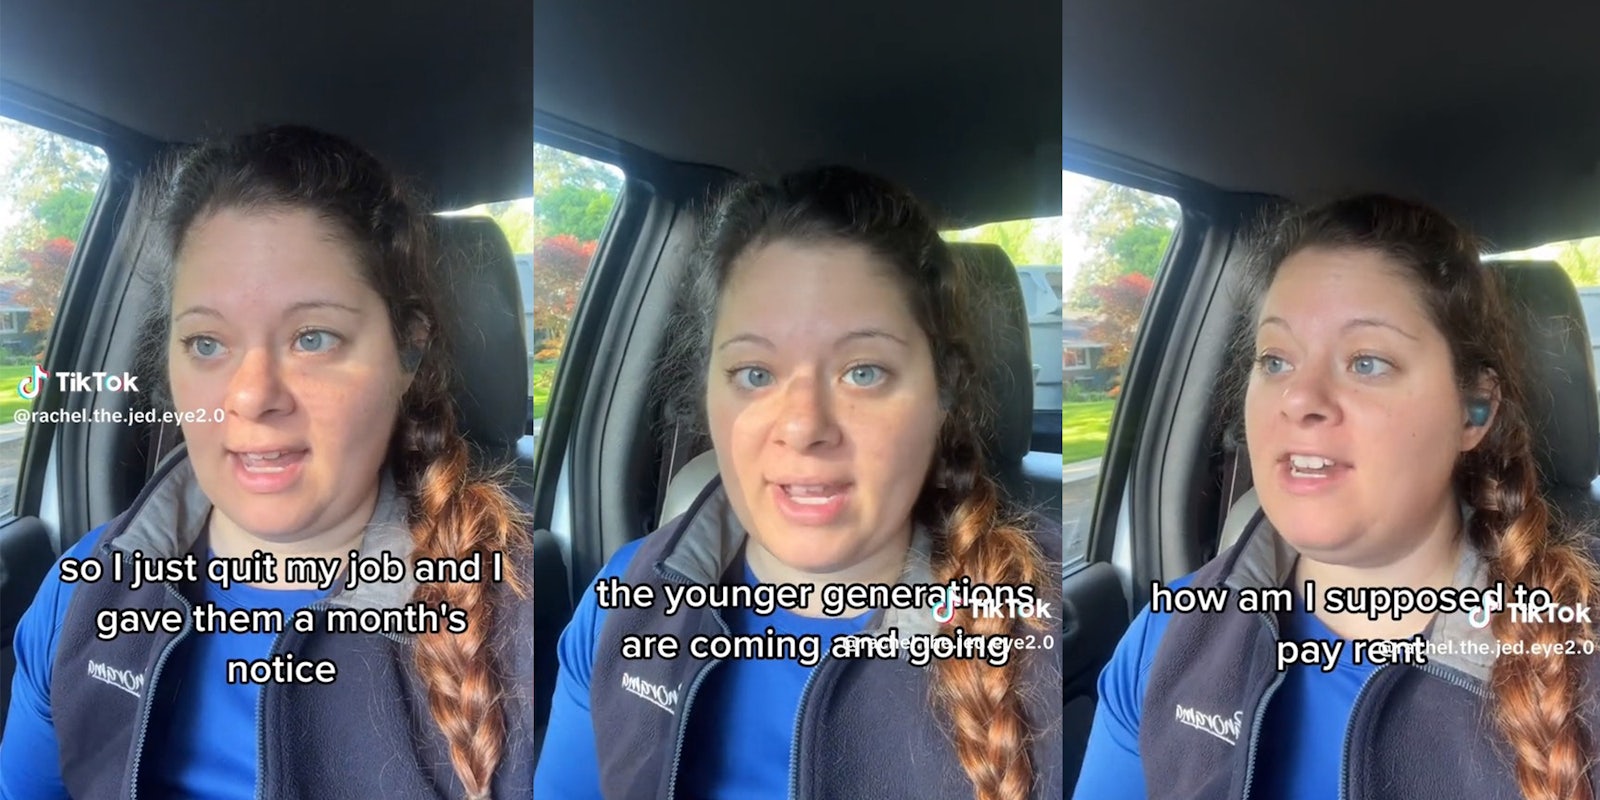 Woman explains that co-worker asked her why she was quitting her job